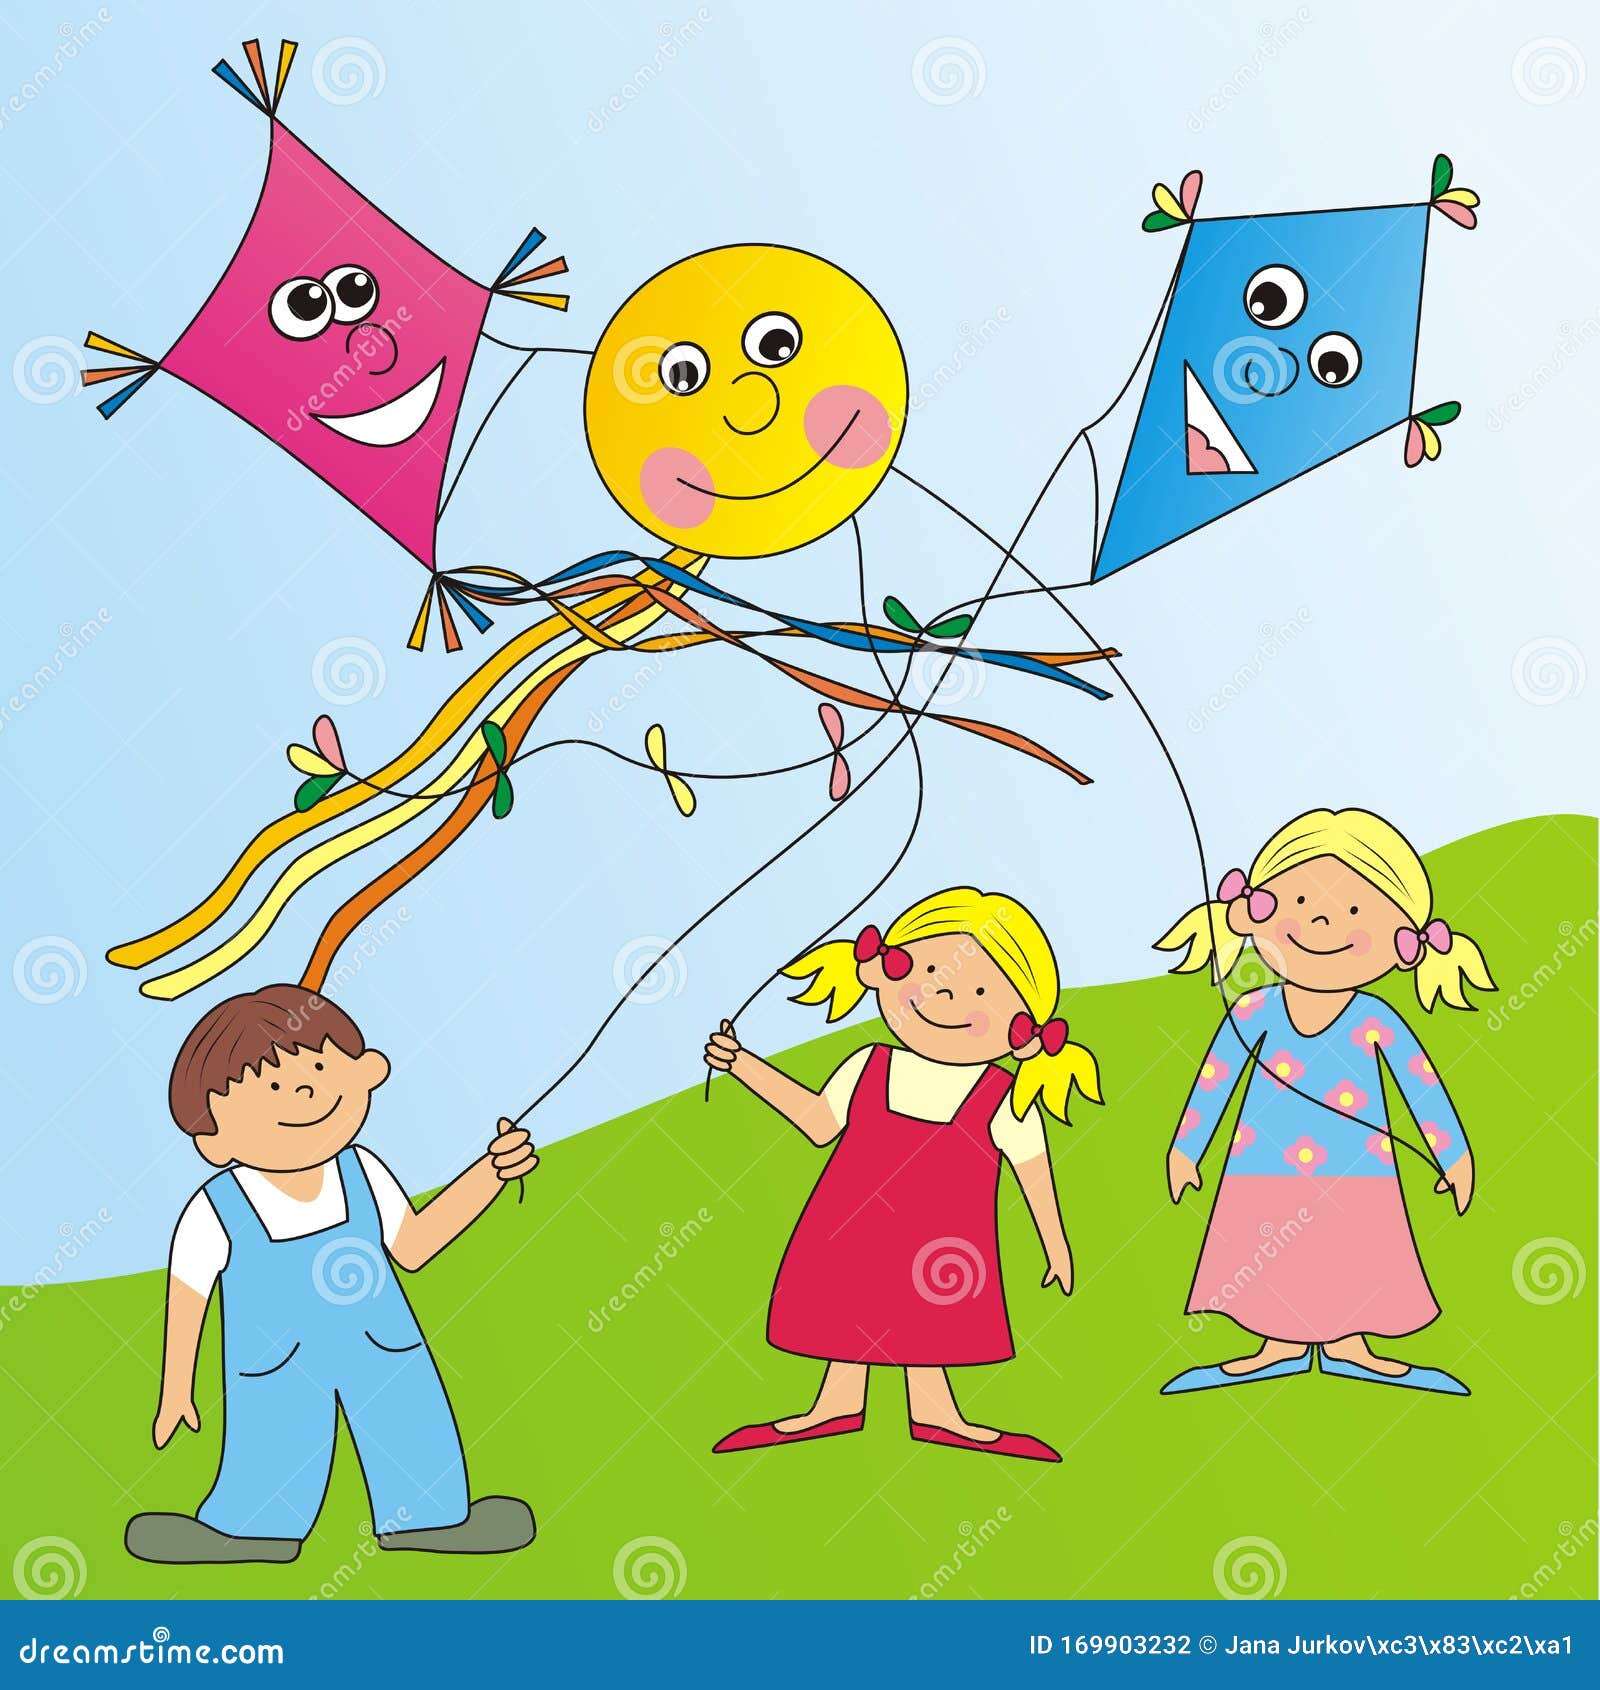 15 Easy Kite Drawing Ideas For Kids - DIYnCrafty